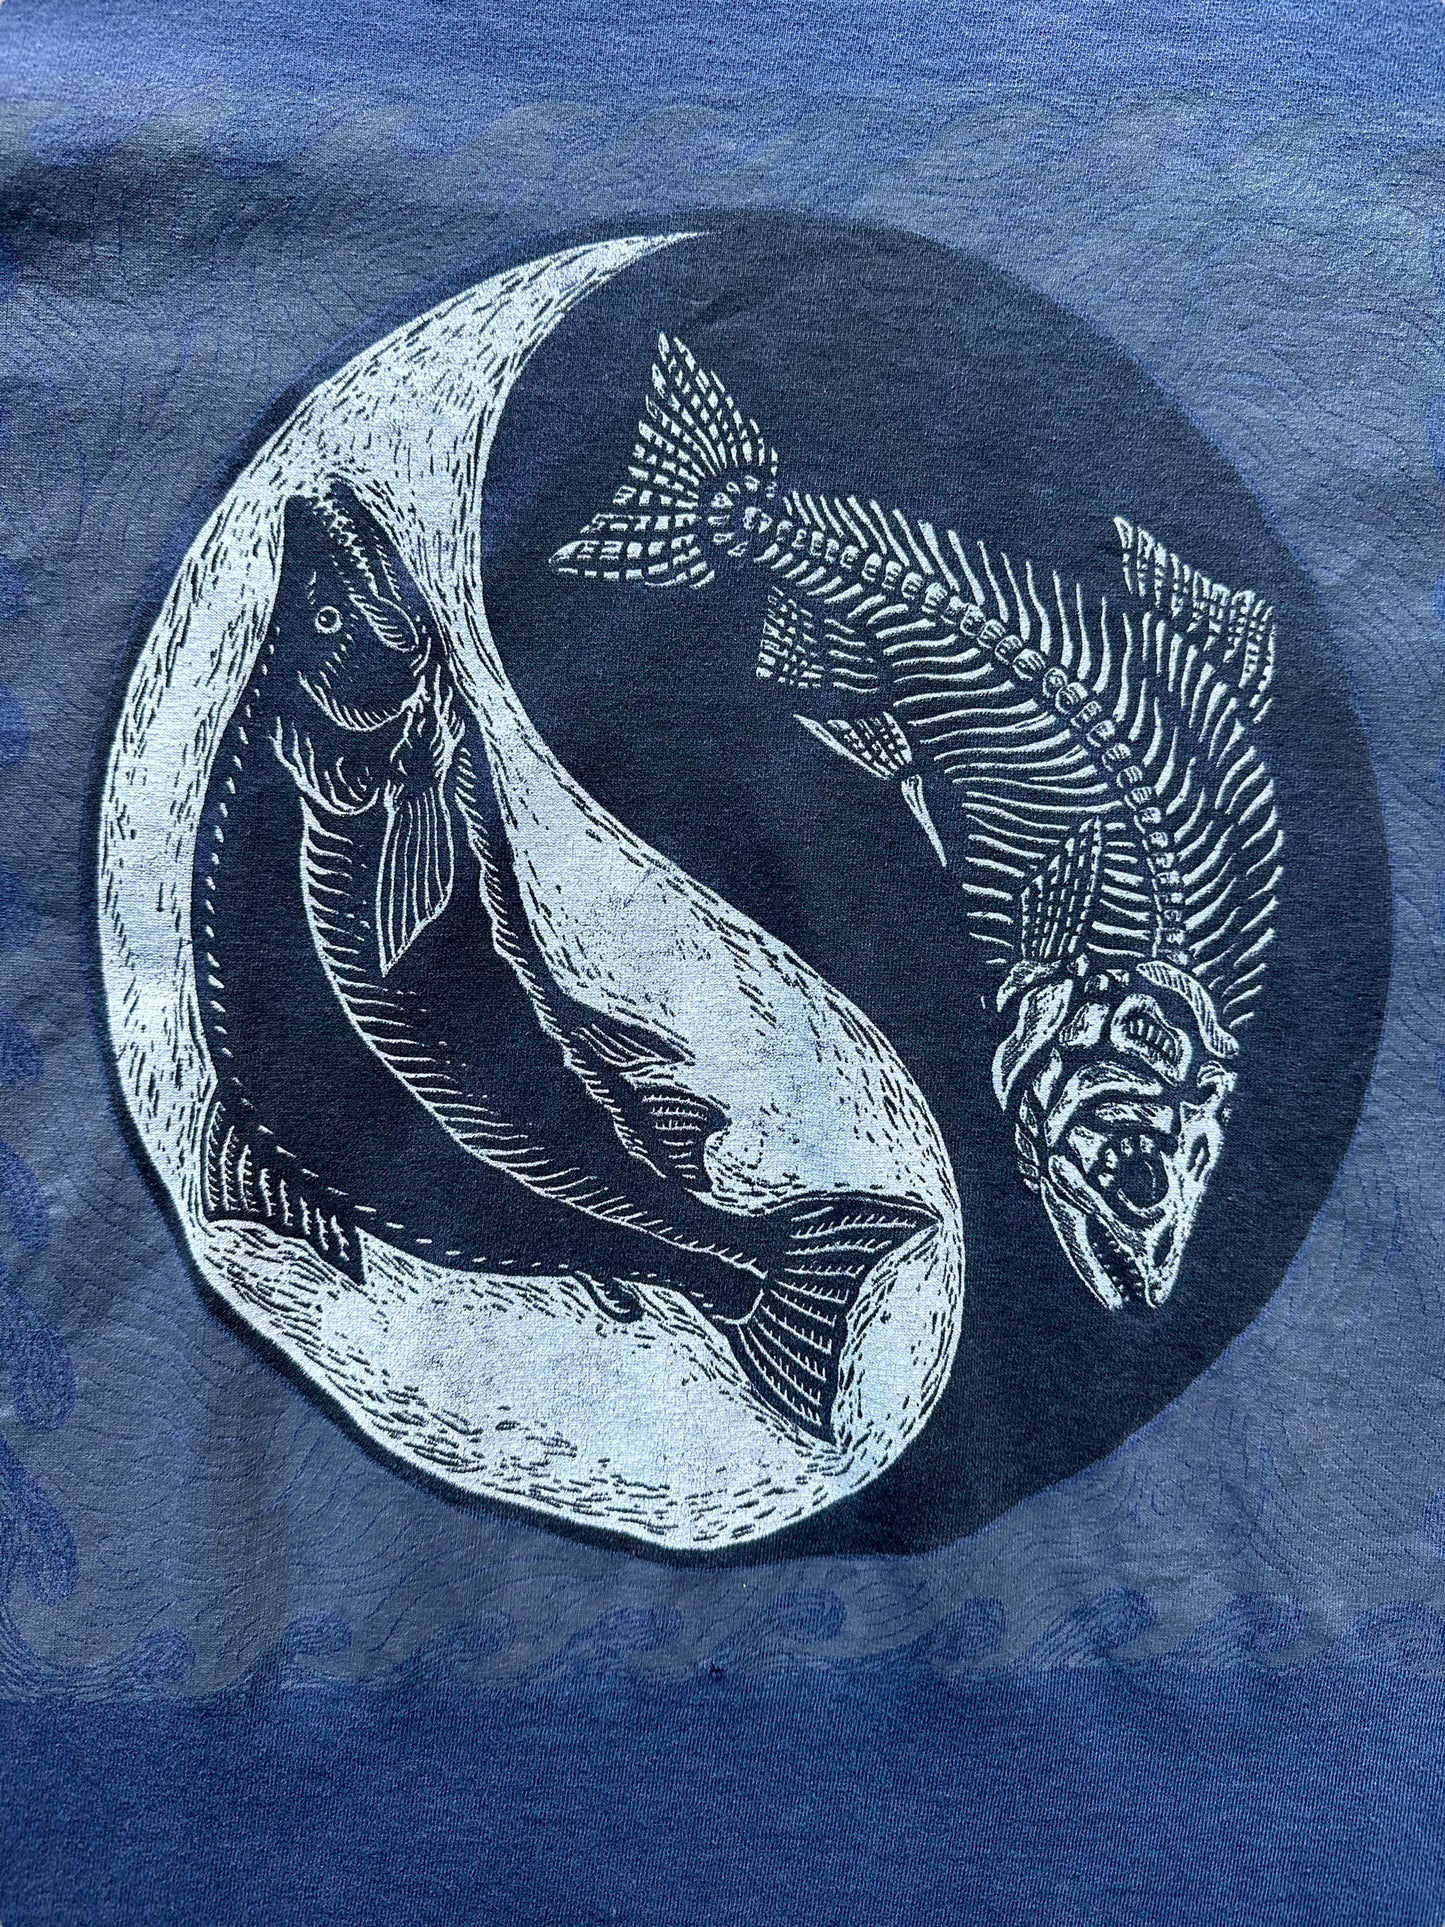 Front graphic of Vintage Ray Troll Life and Death Salmon Tee SZ M |  Vintage Fishing Tee Seattle | Barn Owl Vintage